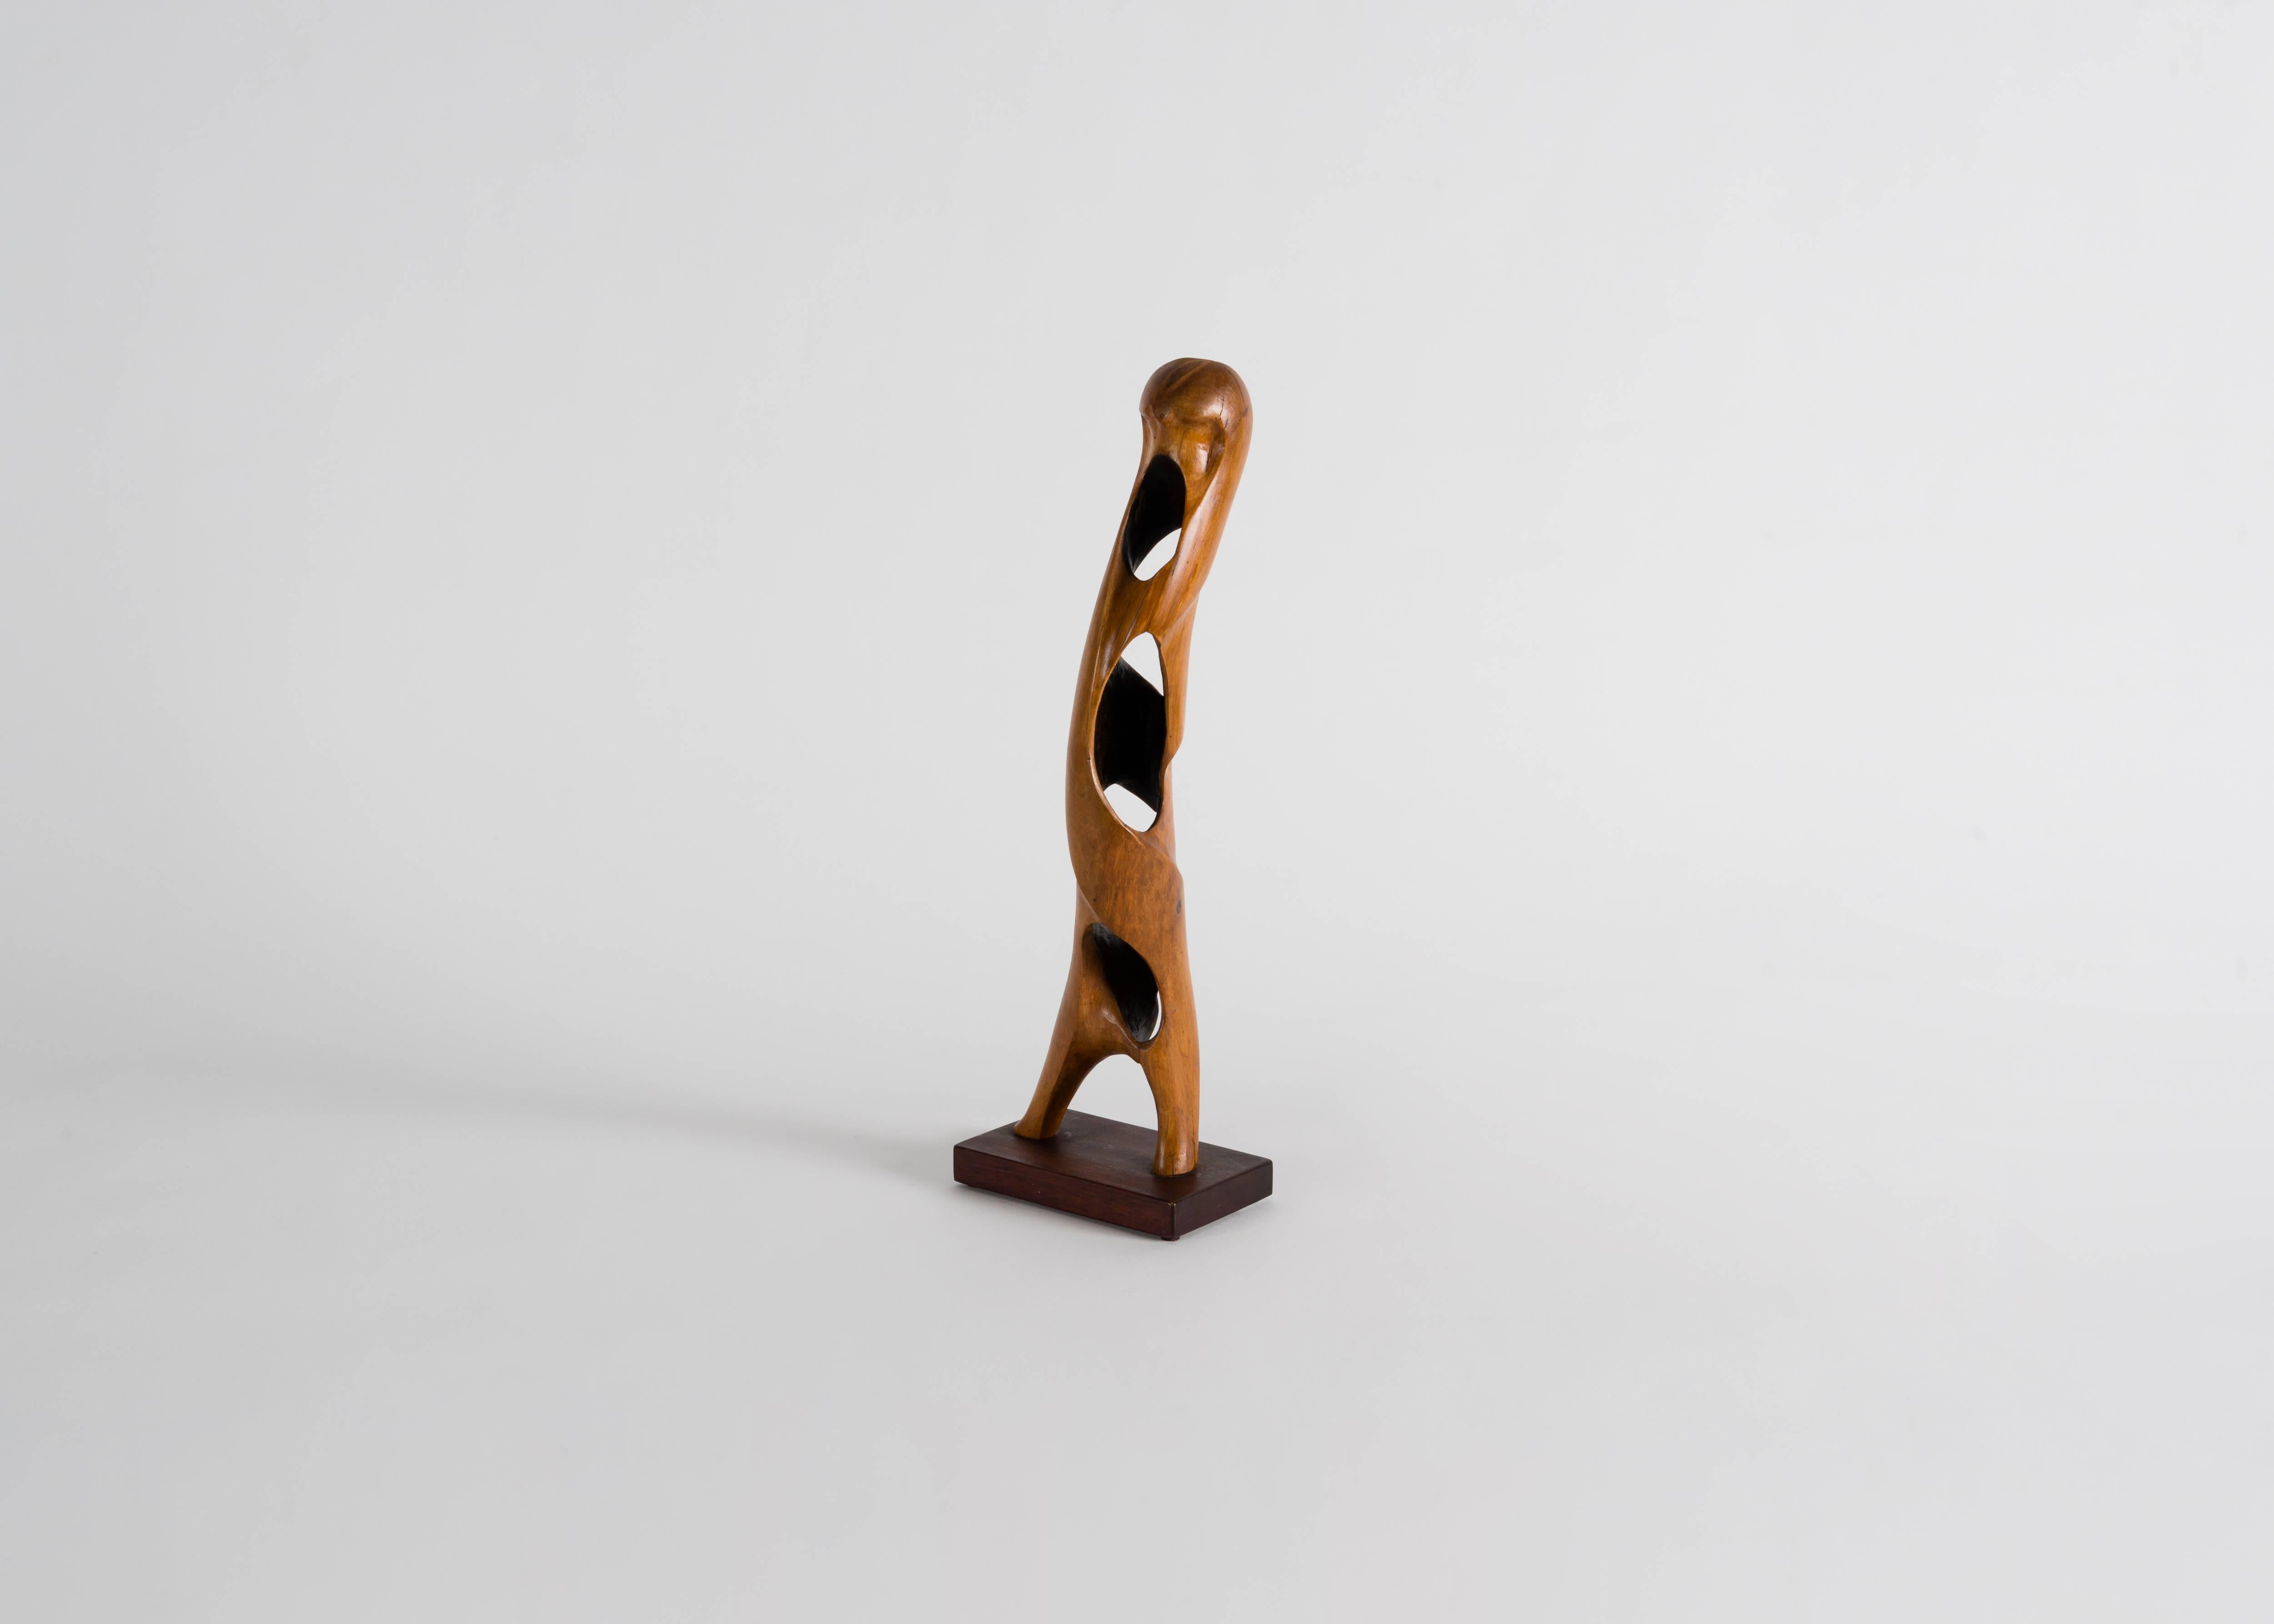 Signed: Mario Dal Fabbro Image of Penguin #2
Marked: I. 7

Typical of the sculptural output of dal Fabbro, the lines of this piece shift rhythmically depending on the viewer's position. The artist plays with the relationship between space and